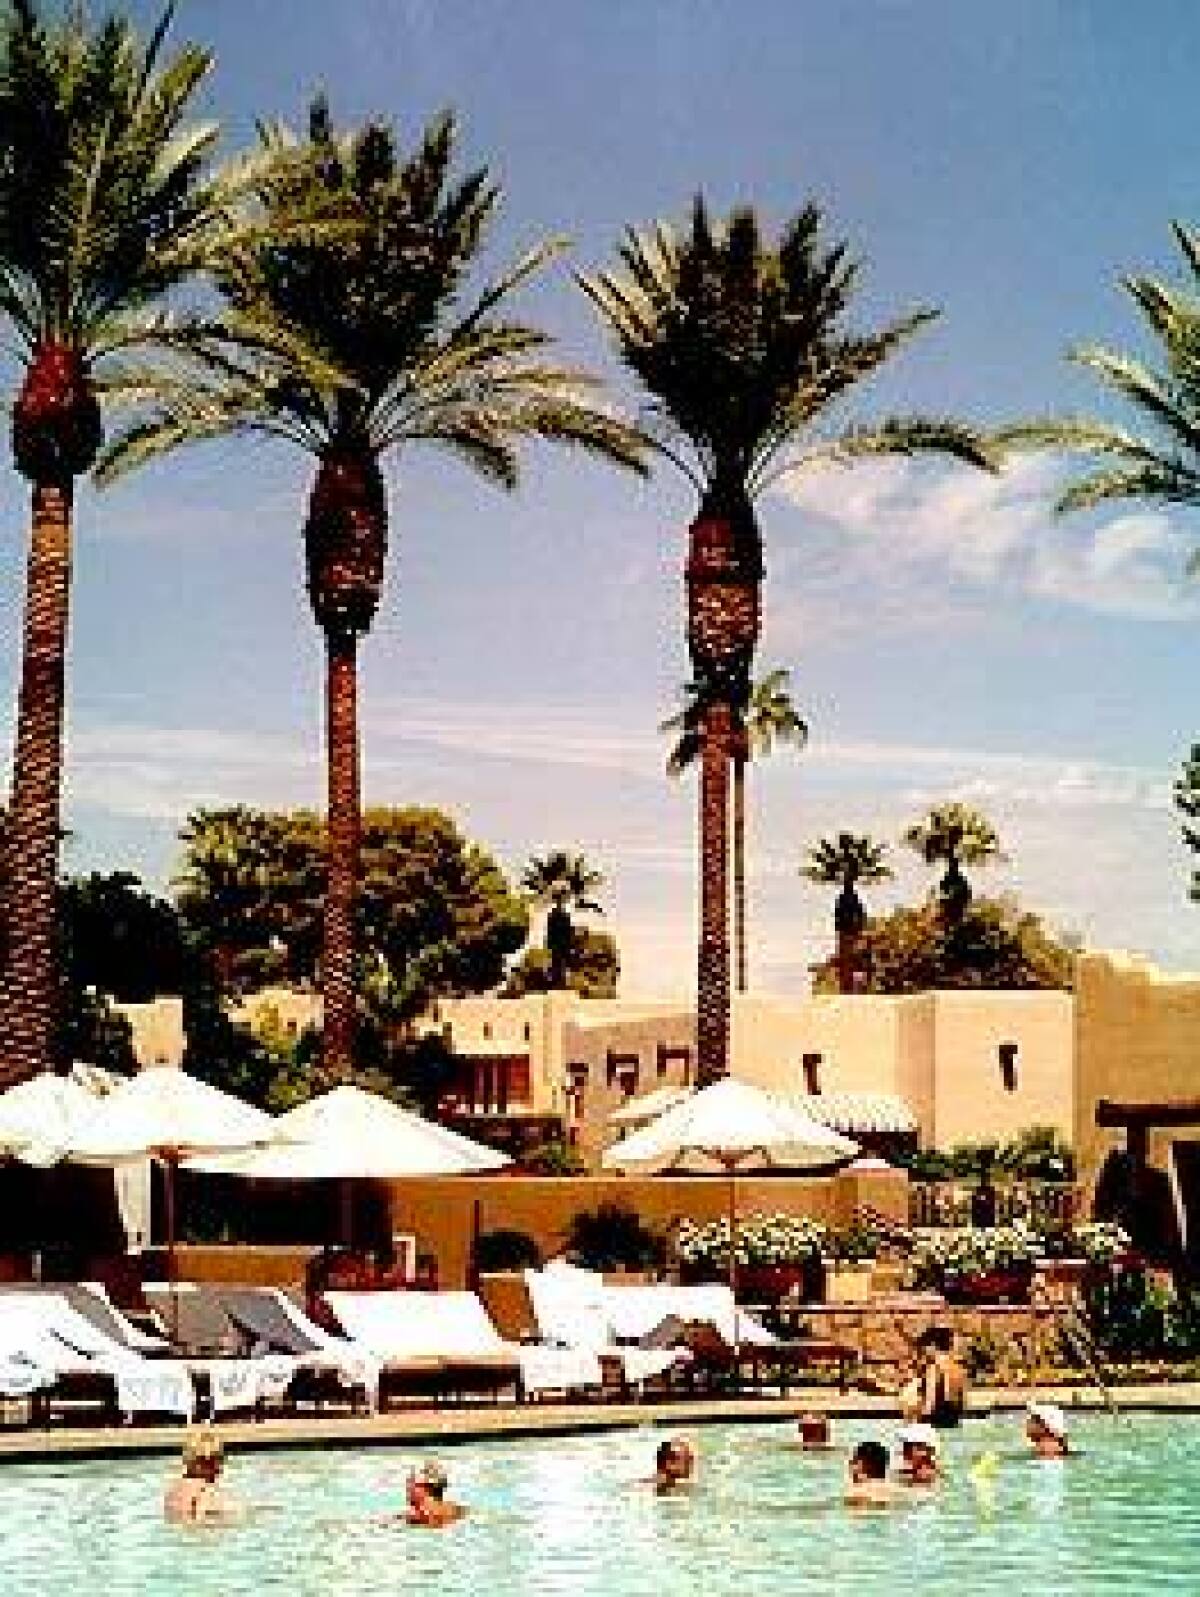 The Wigwam Resort & Golf Club in Litchfield Park, a public resort since 1929, retains some of its old-time charm despite undergoing a major expansion and renovation